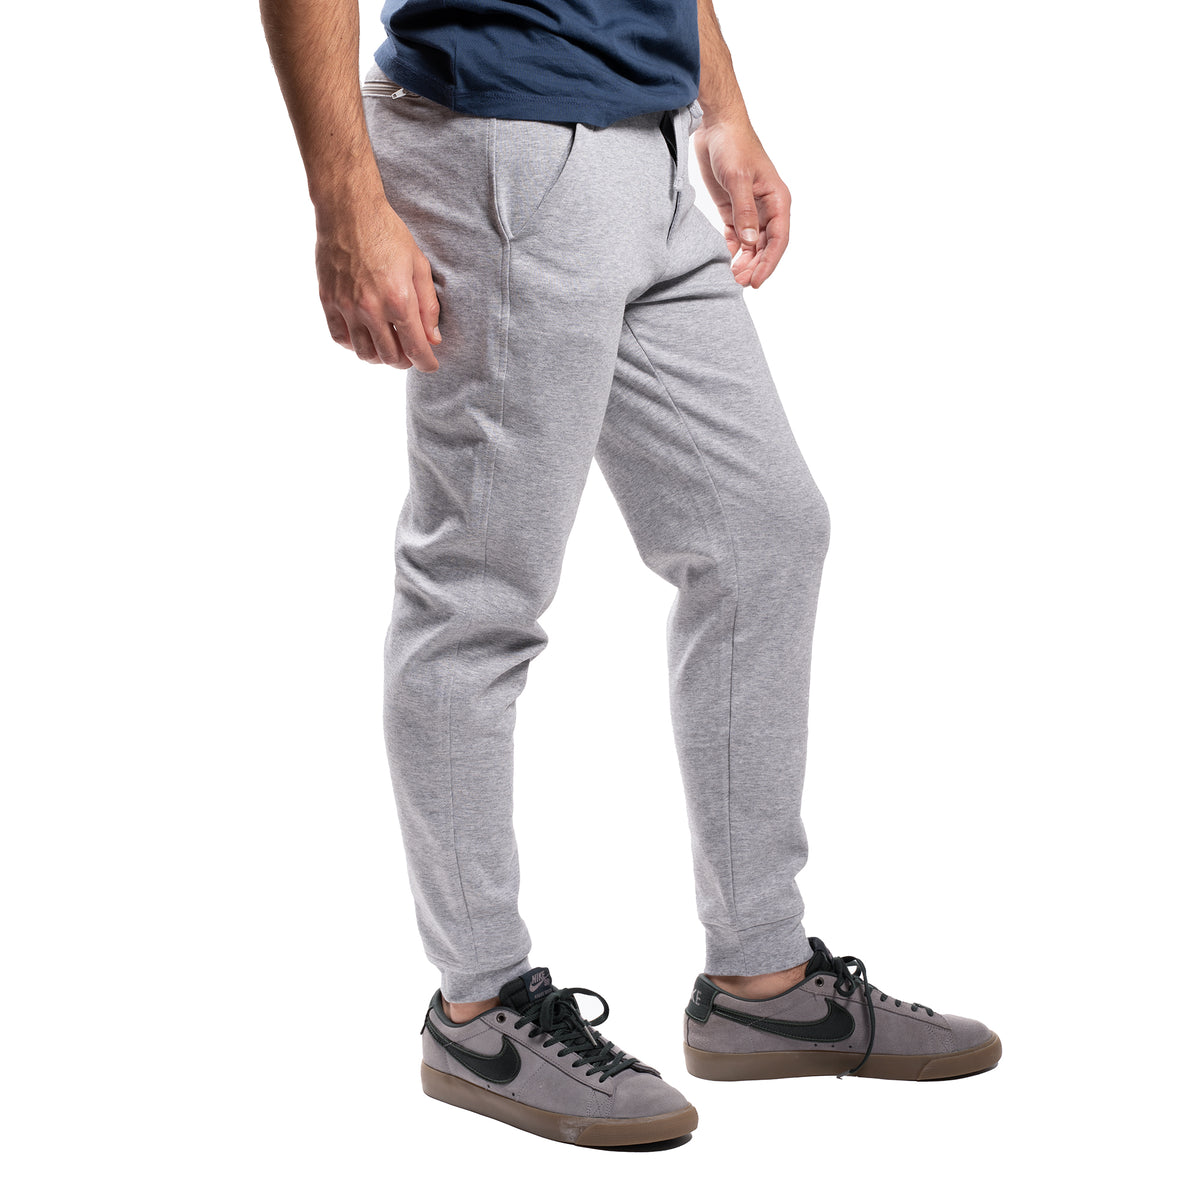 These $11 Jogger Sweatpants Have More Than 1,200 Great Reviews